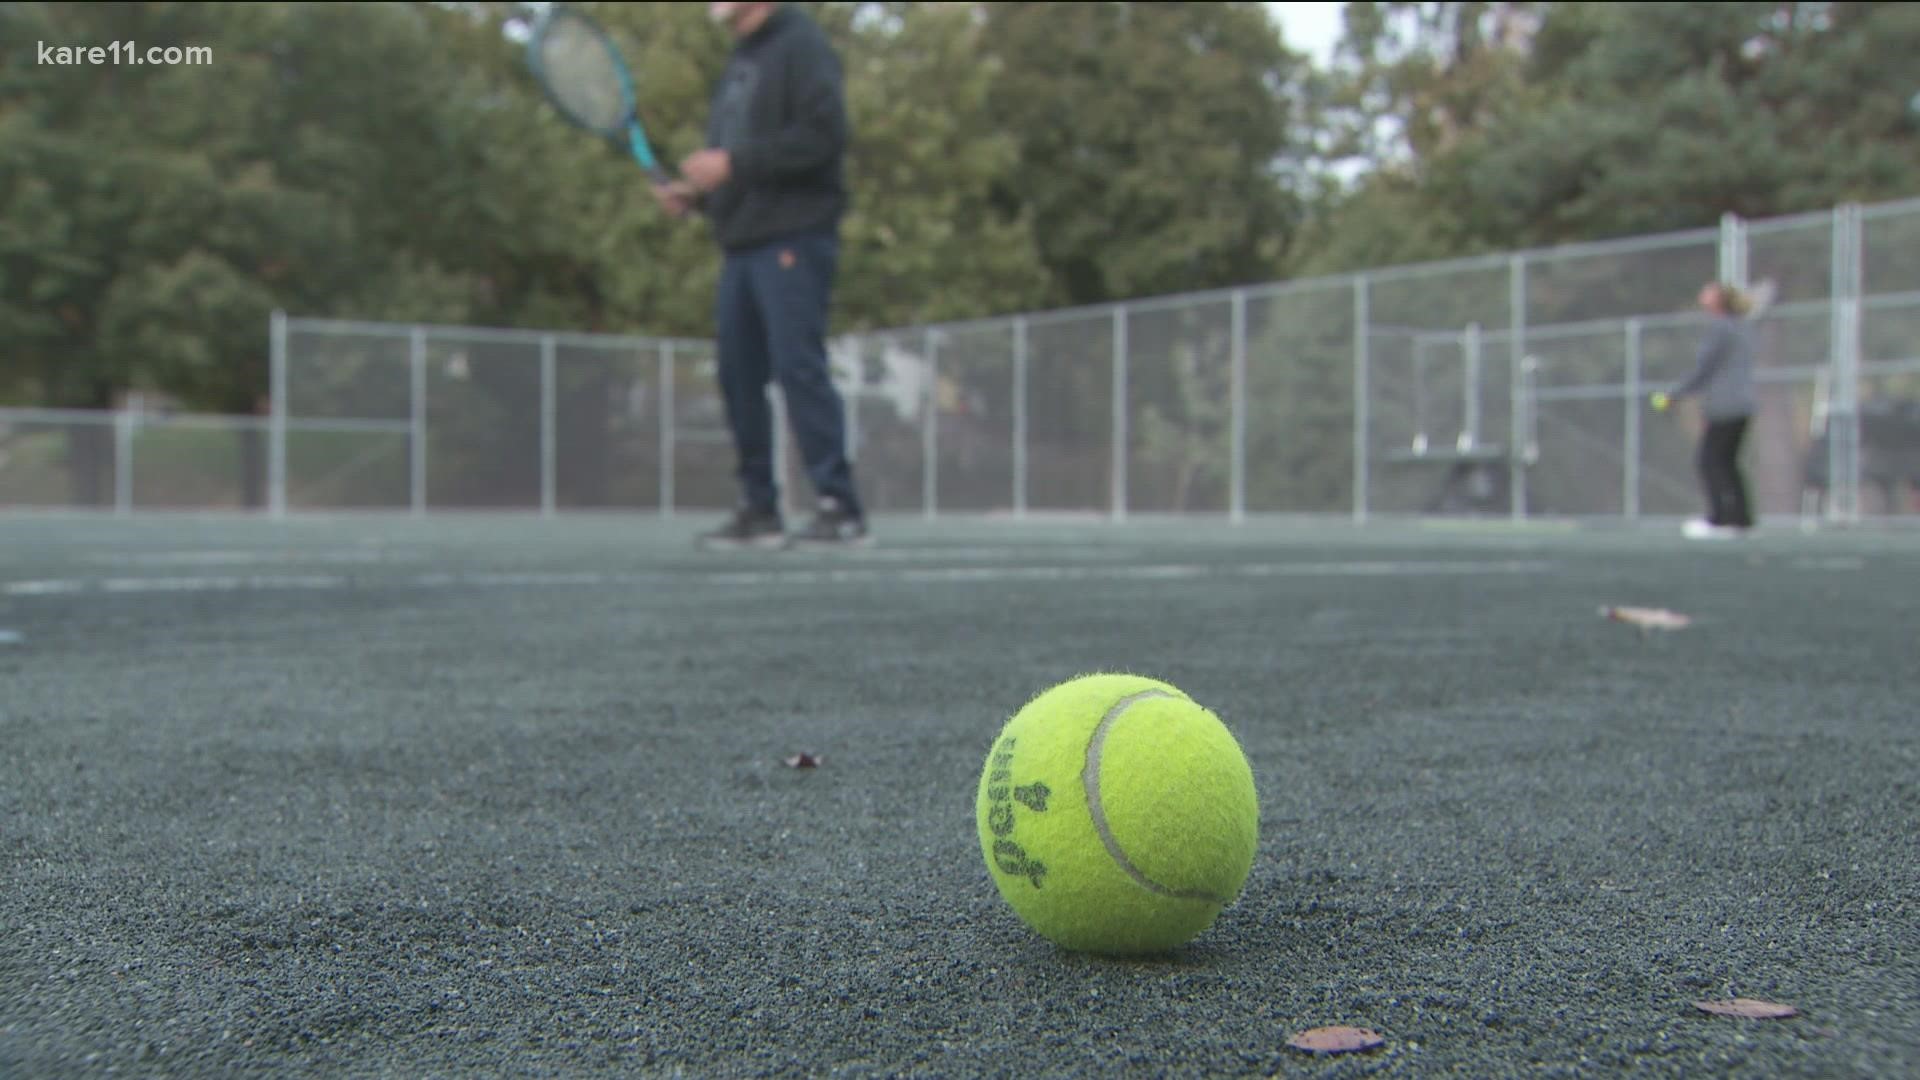 The courts in Waveland Triangle are the first public clay courts in the state.